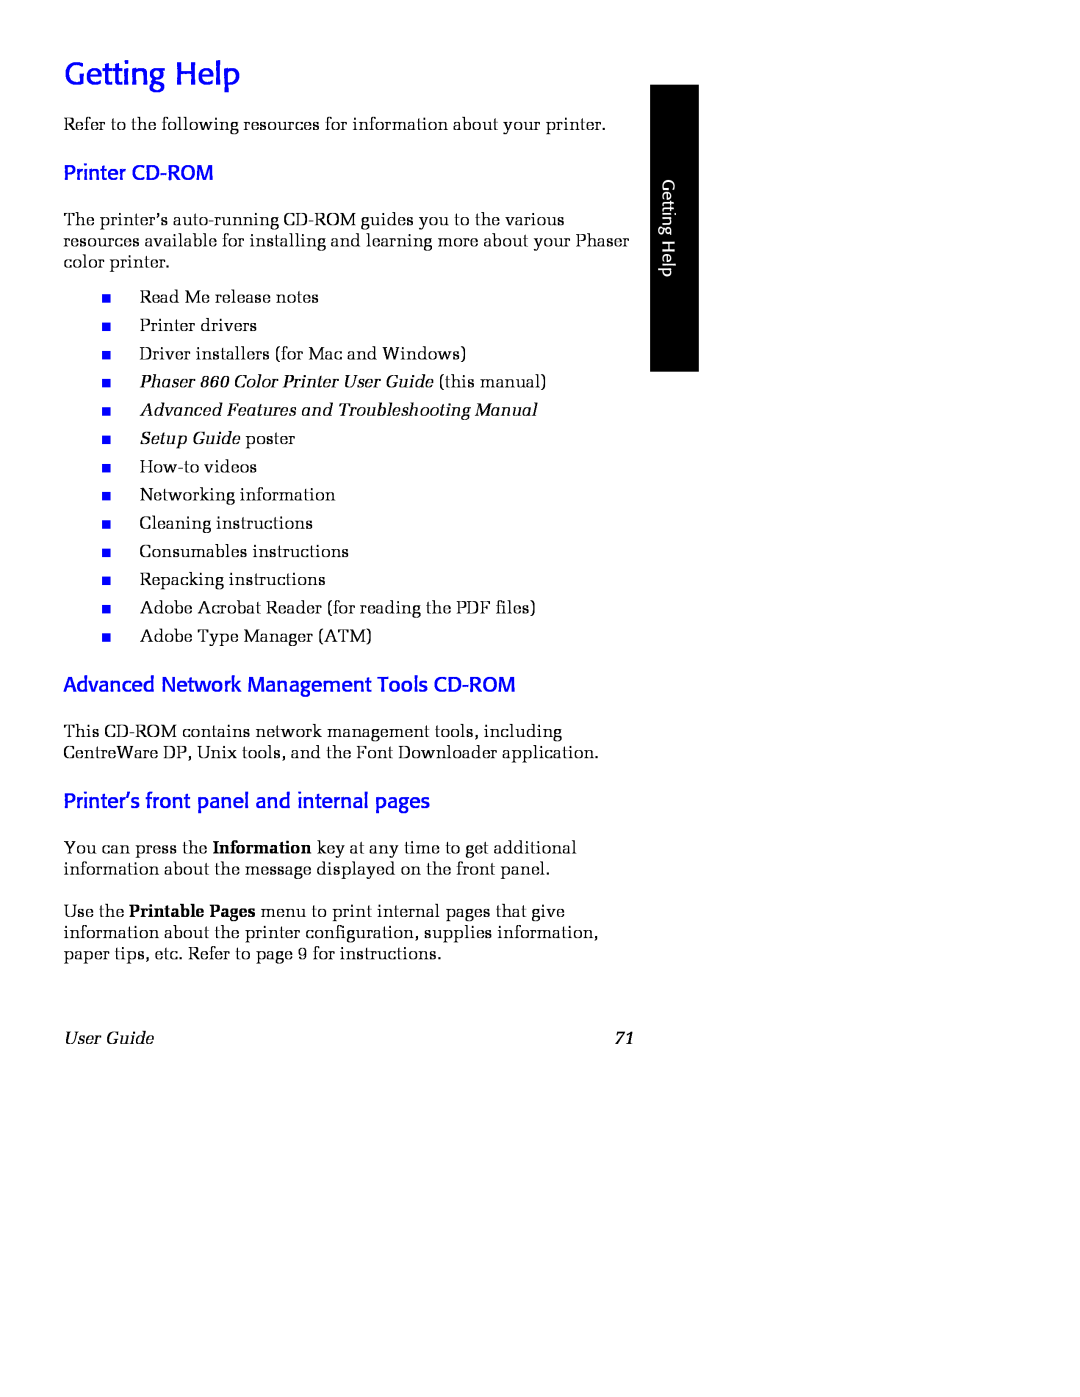 Xerox Getting Help, Phaser 860 Color Printer User Guide this manual 